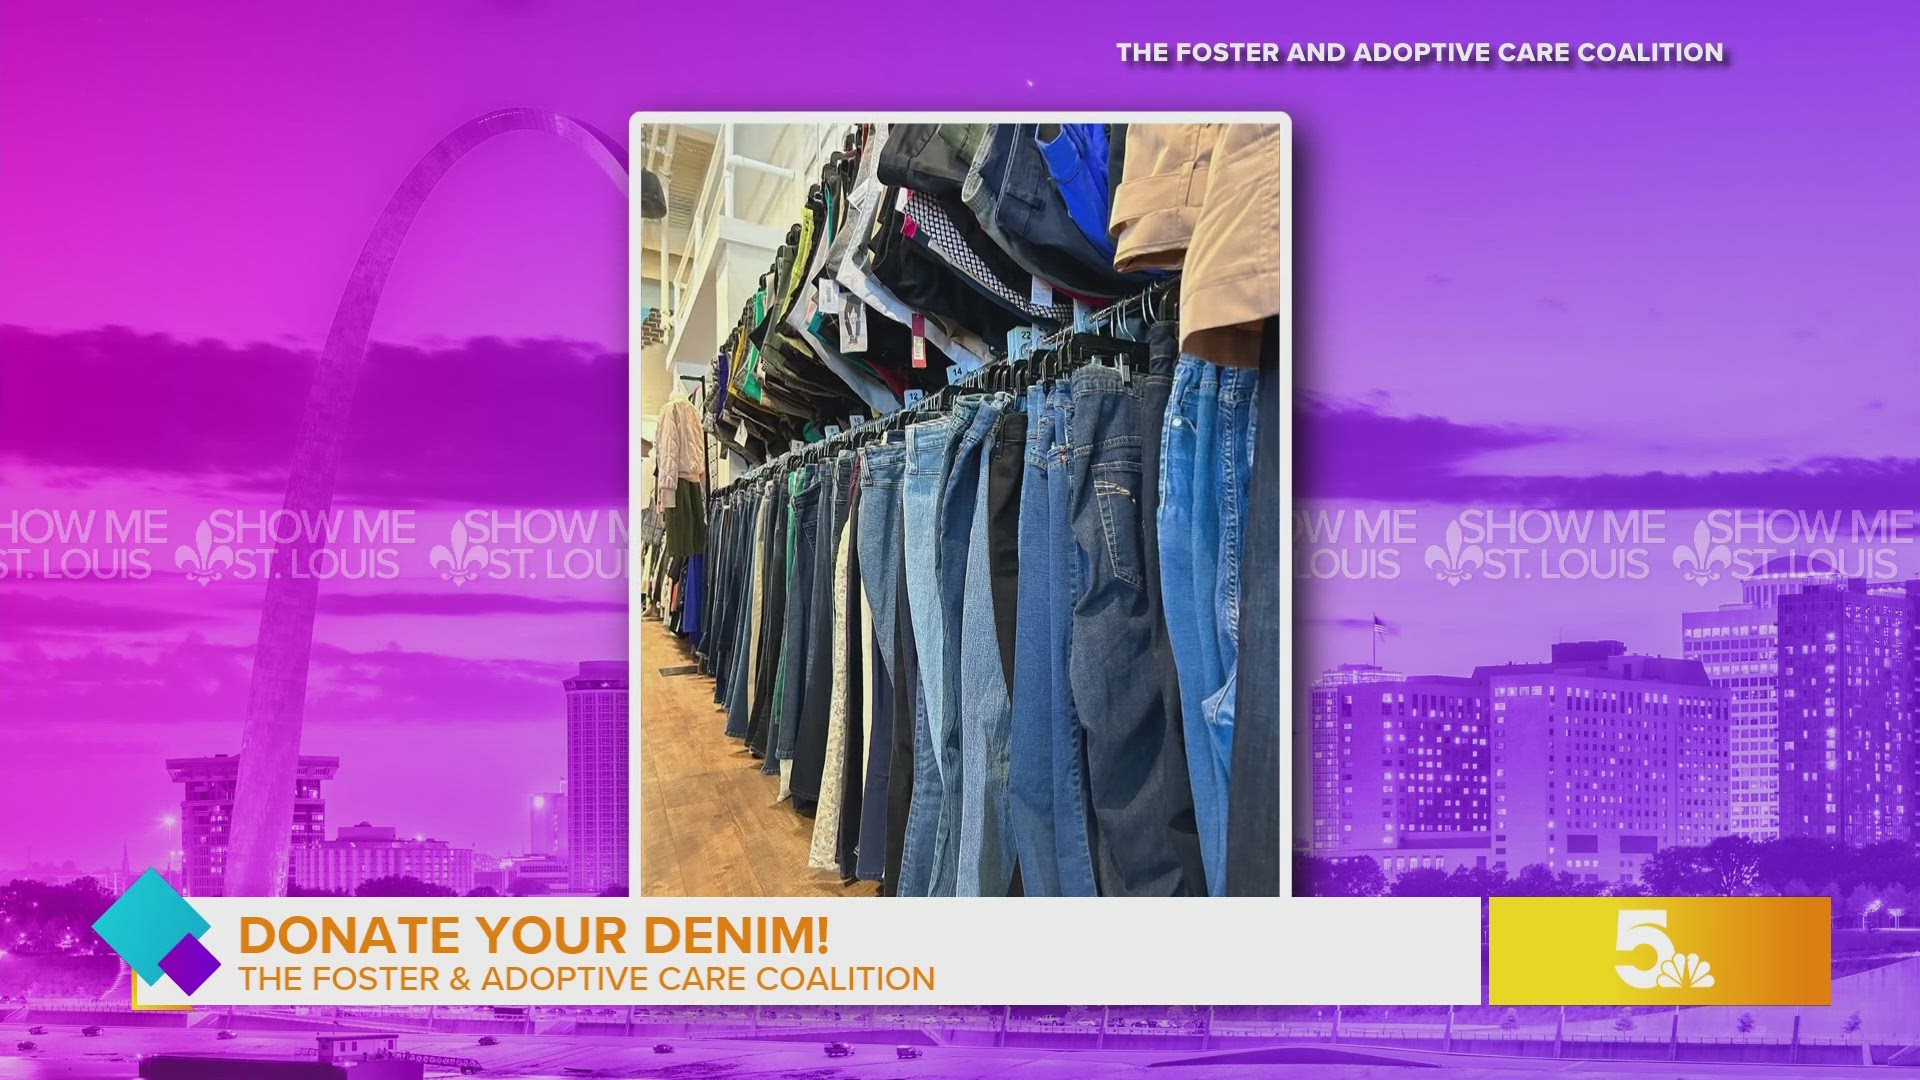 Support the Foster and Adoptive Care Coalition by dropping off anything denim at West County Center on Level 1 near Nordstrom until October 15th.